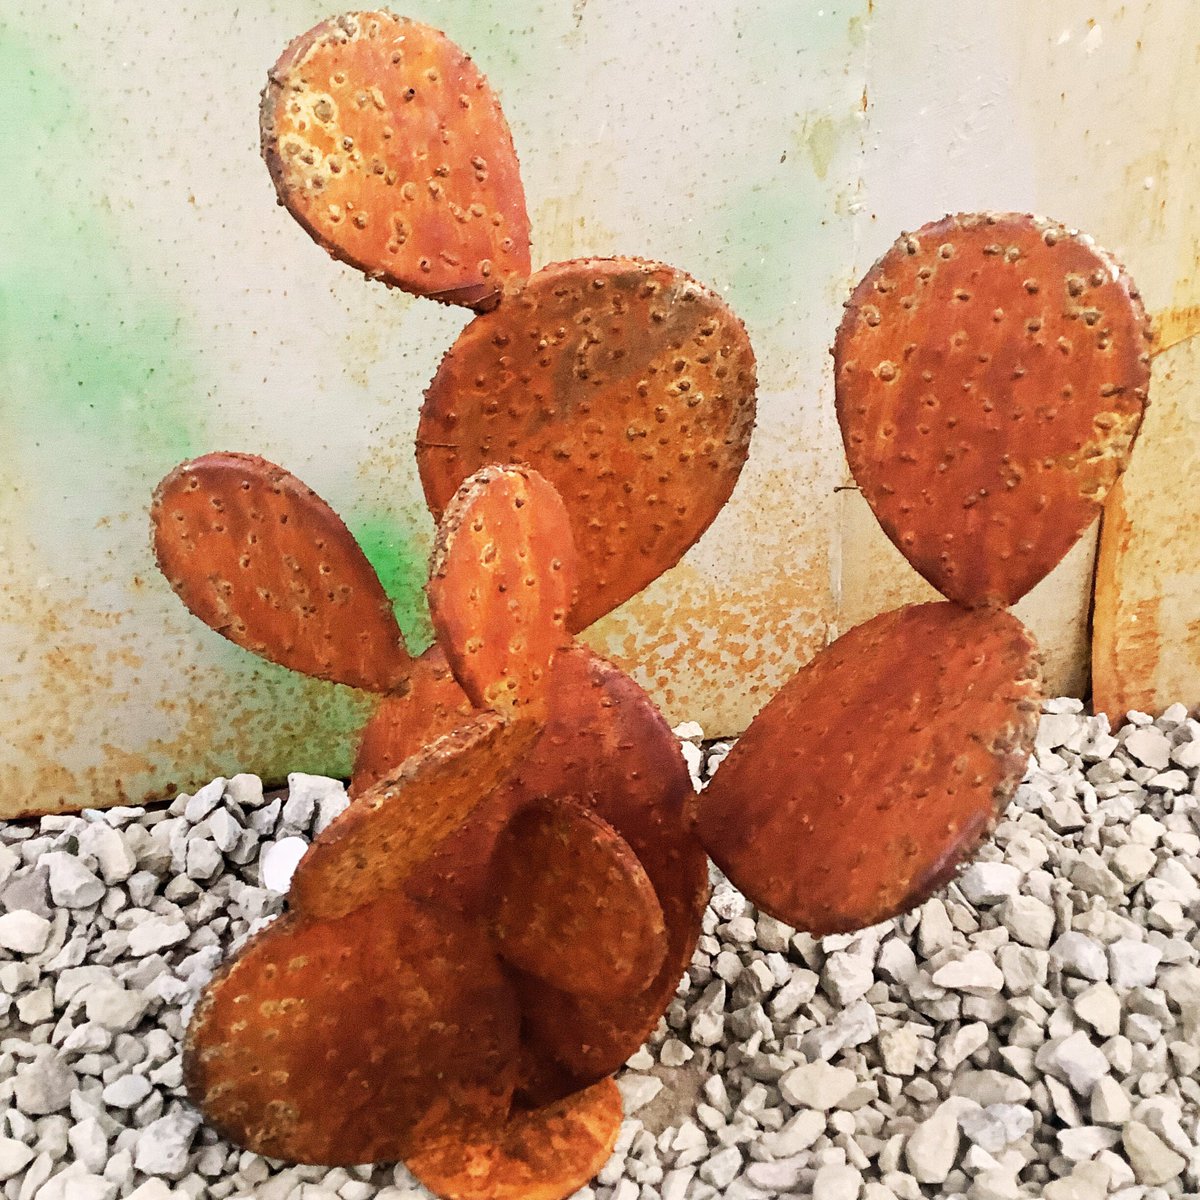 Excited to share the latest addition to my #etsy shop: Rustic prickly pear cactus | metal cacti | Thorny desert | Rustic Patina | Gift for Mom | freeshipping | Prickly Pear | Cactus Metal Art etsy.me/45Swu5z #pricklypear #rarepricklypear #minicactus #pricklypea